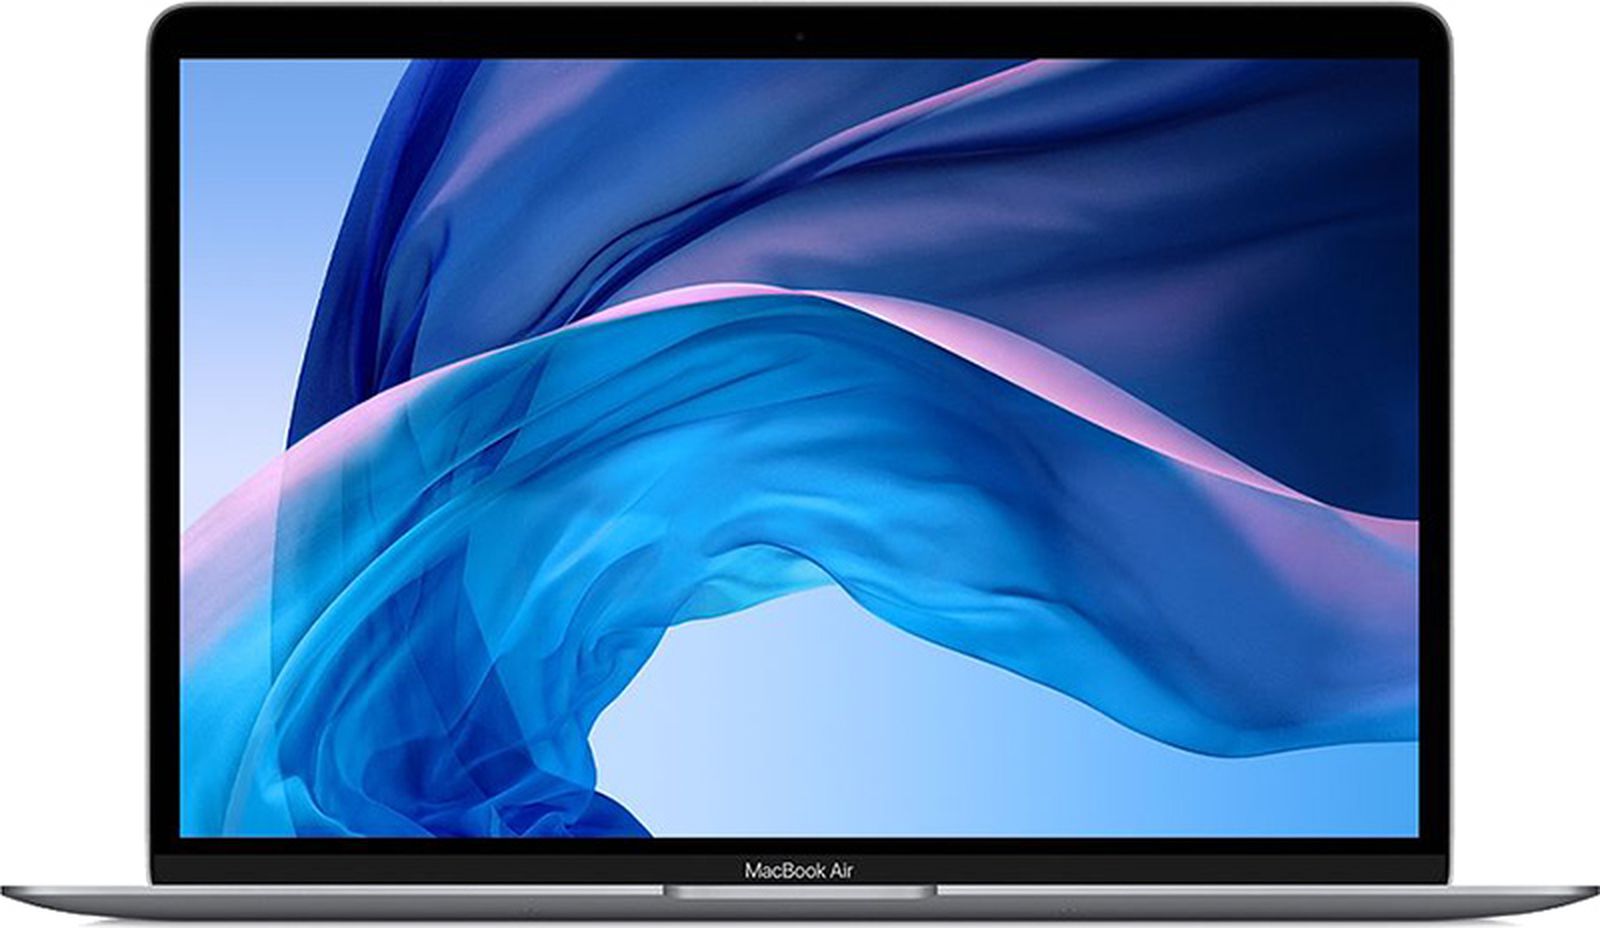 asking apple care to remove ssd when sending in mac for repair